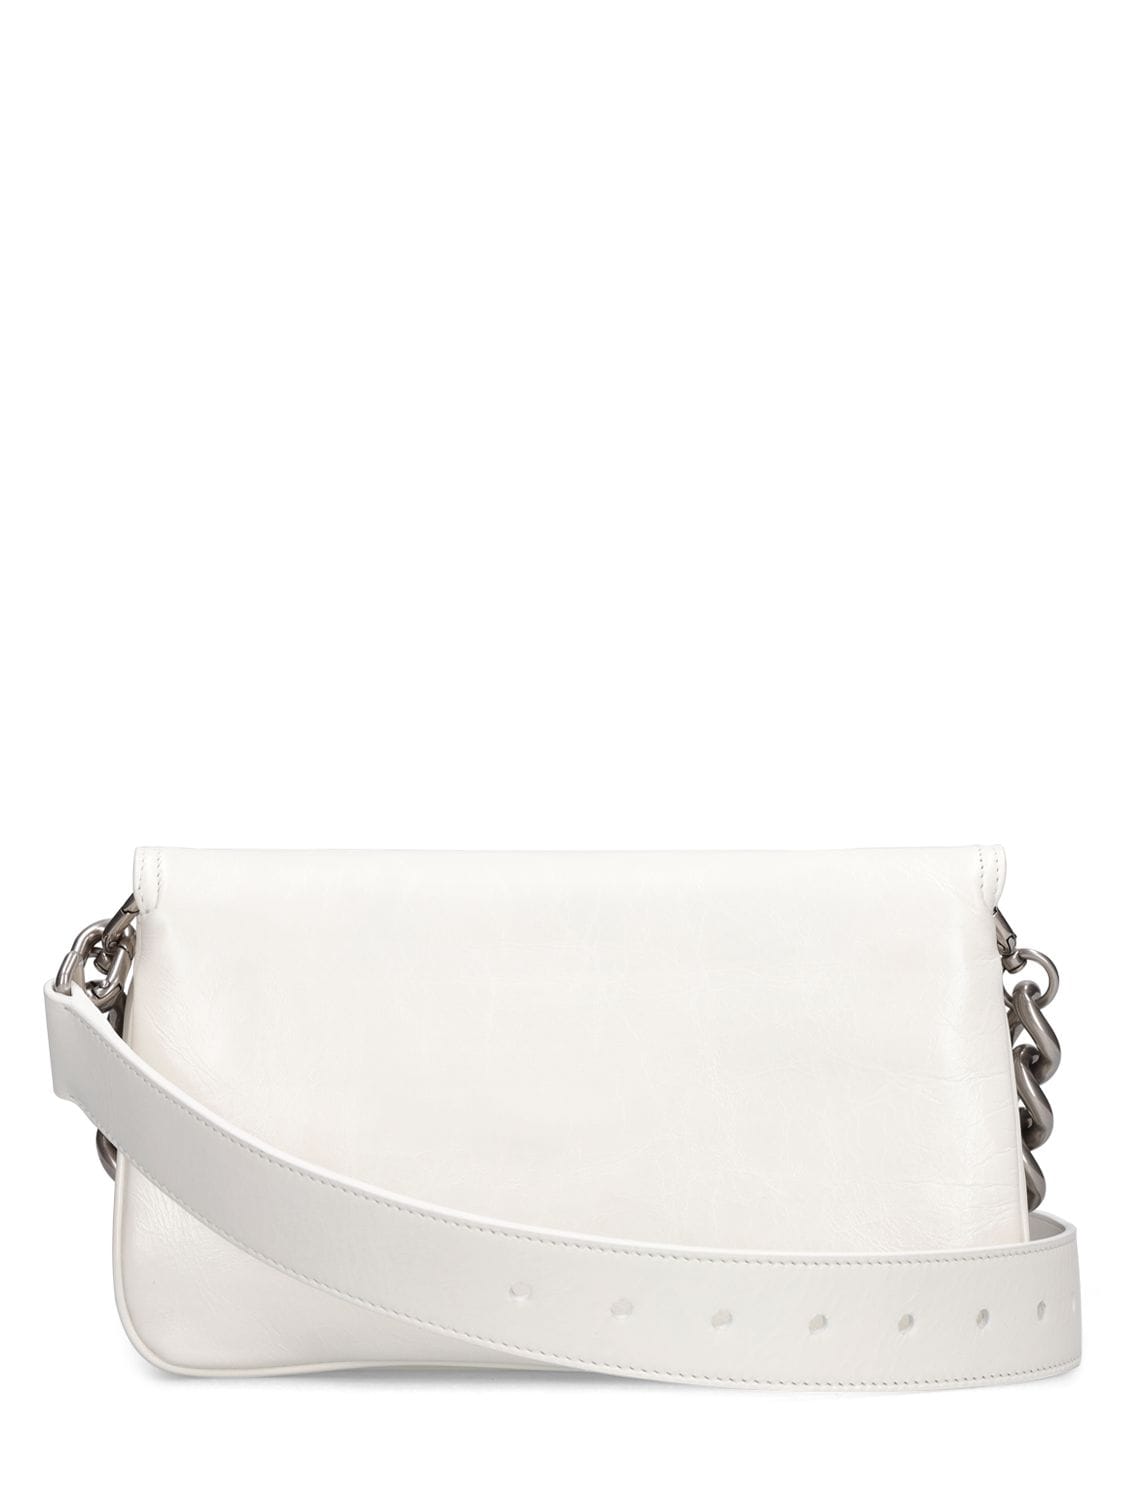 Shop Balenciaga Small Bb Soft Leather Shoulder Bag In Optisches Weiss